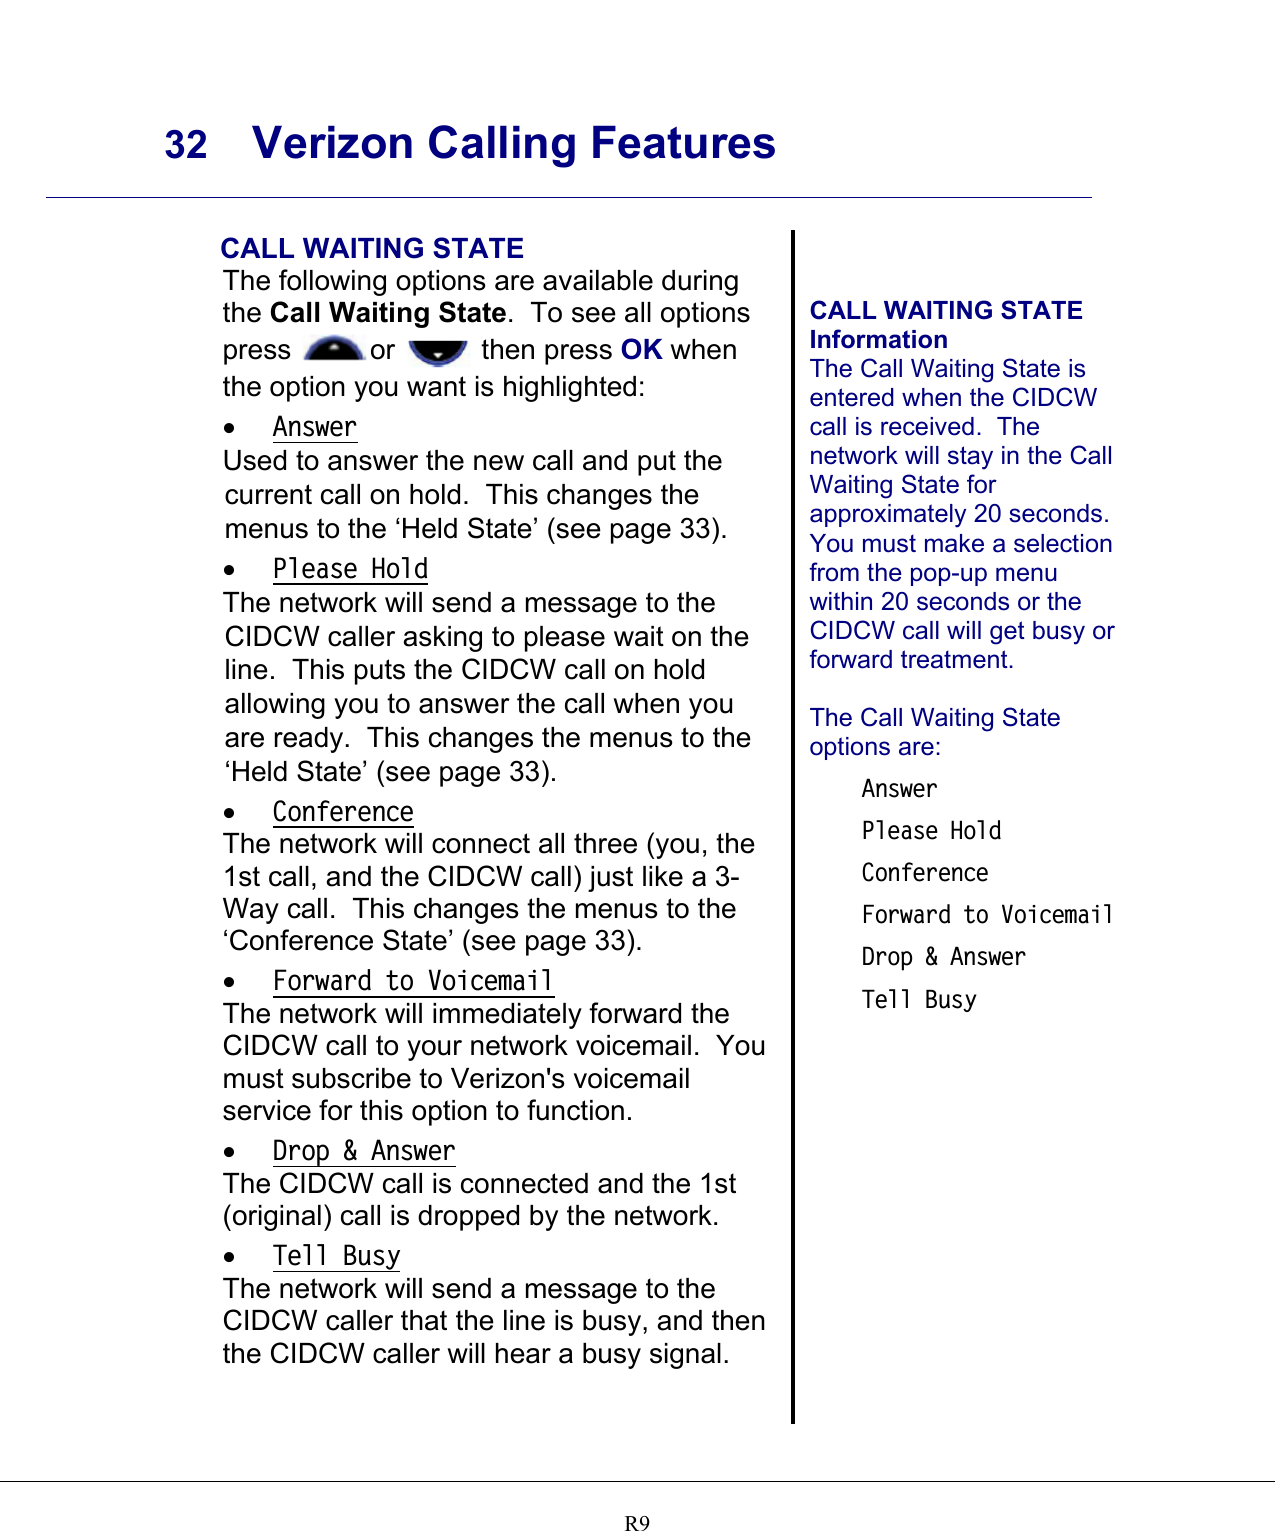     32 Verizon Calling Features    R9 CALL WAITING STATE The following options are available during the Call Waiting State.  To see all options press  or   then press OK when the option you want is highlighted:  •  Answer Used to answer the new call and put the current call on hold.  This changes the menus to the ‘Held State’ (see page 33). •  Please Hold The network will send a message to the CIDCW caller asking to please wait on the line.  This puts the CIDCW call on hold allowing you to answer the call when you are ready.  This changes the menus to the ‘Held State’ (see page 33). •  Conference The network will connect all three (you, the 1st call, and the CIDCW call) just like a 3-Way call.  This changes the menus to the ‘Conference State’ (see page 33). •  Forward to Voicemail The network will immediately forward the CIDCW call to your network voicemail.  You must subscribe to Verizon&apos;s voicemail service for this option to function. •  Drop &amp; Answer The CIDCW call is connected and the 1st (original) call is dropped by the network. •  Tell Busy The network will send a message to the CIDCW caller that the line is busy, and then the CIDCW caller will hear a busy signal.   CALL WAITING STATE Information The Call Waiting State is entered when the CIDCW call is received.  The network will stay in the Call Waiting State for approximately 20 seconds.  You must make a selection from the pop-up menu within 20 seconds or the CIDCW call will get busy or forward treatment.  The Call Waiting State options are: Answer Please Hold Conference Forward to Voicemail Drop &amp; Answer Tell Busy     